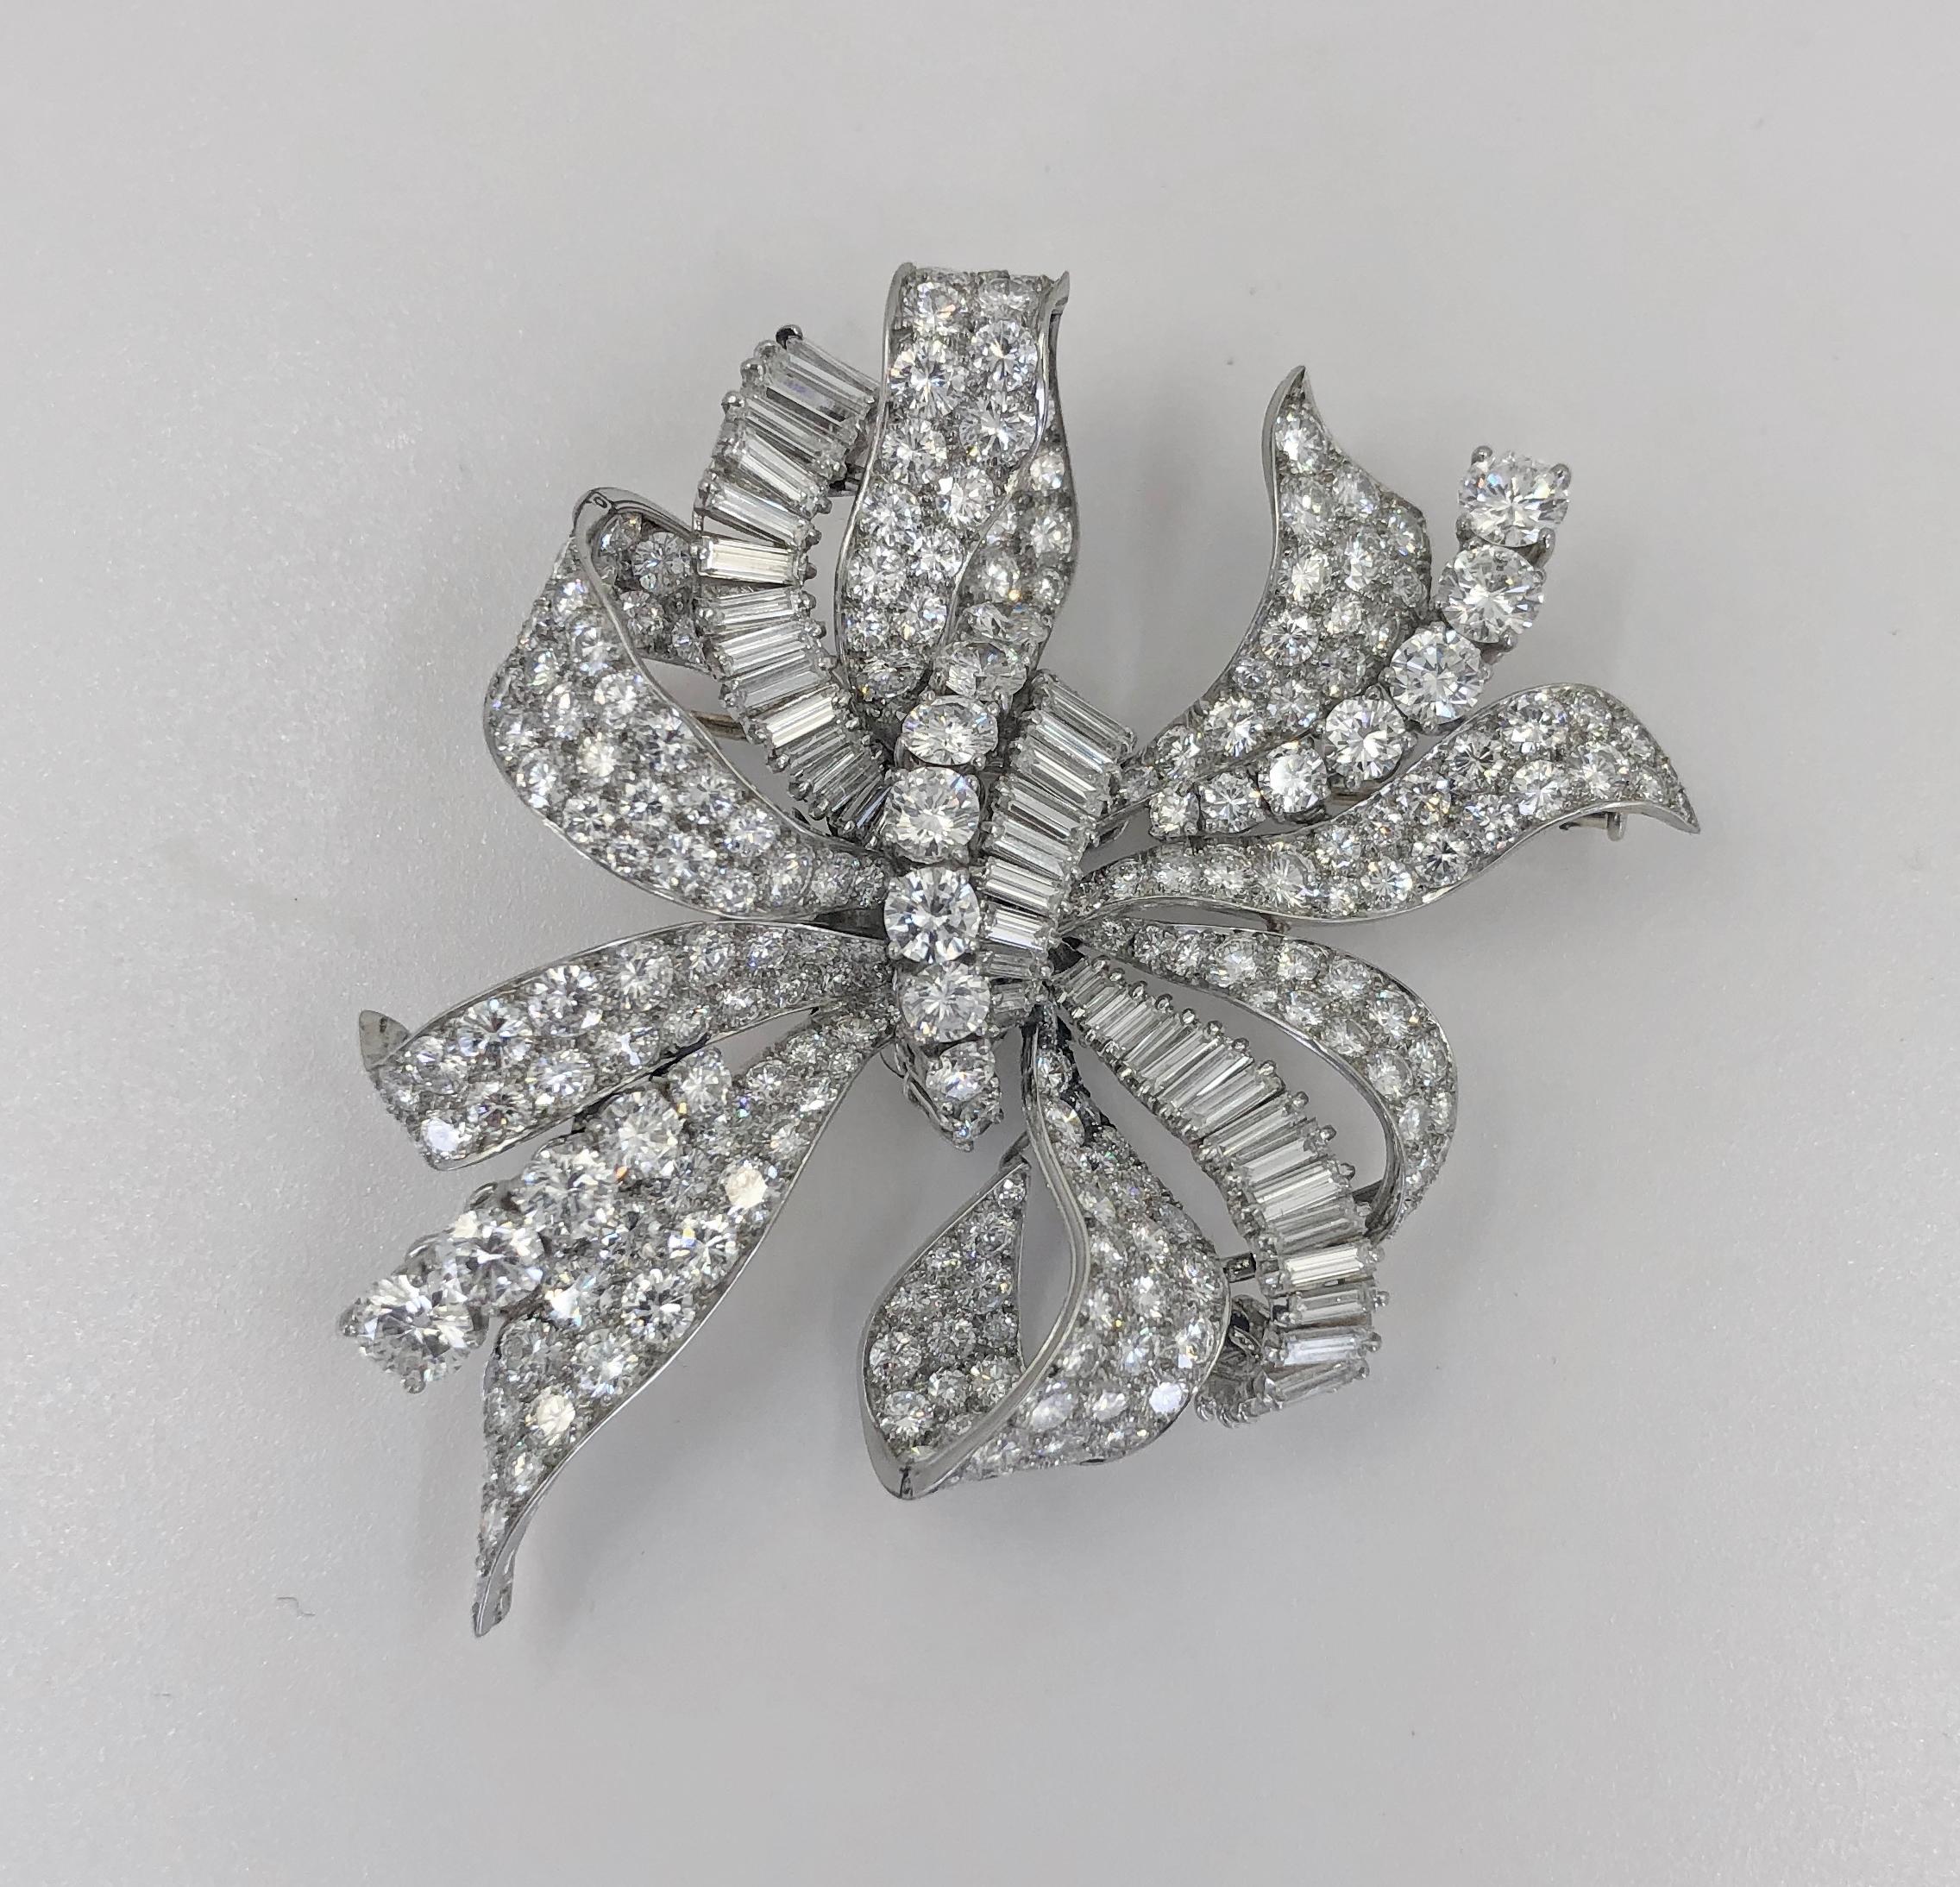 BULGARI Diamond Bow Brooch.

A platinum bow, set with round and baguette diamonds weighing approx. 22-24 carats DEF color, VVS clarity.
Gross weight approx. 40 grams and dimensions approx. 2.5″ x 2.0″
Stamped “Bulgari“; Italy; circa 1950s